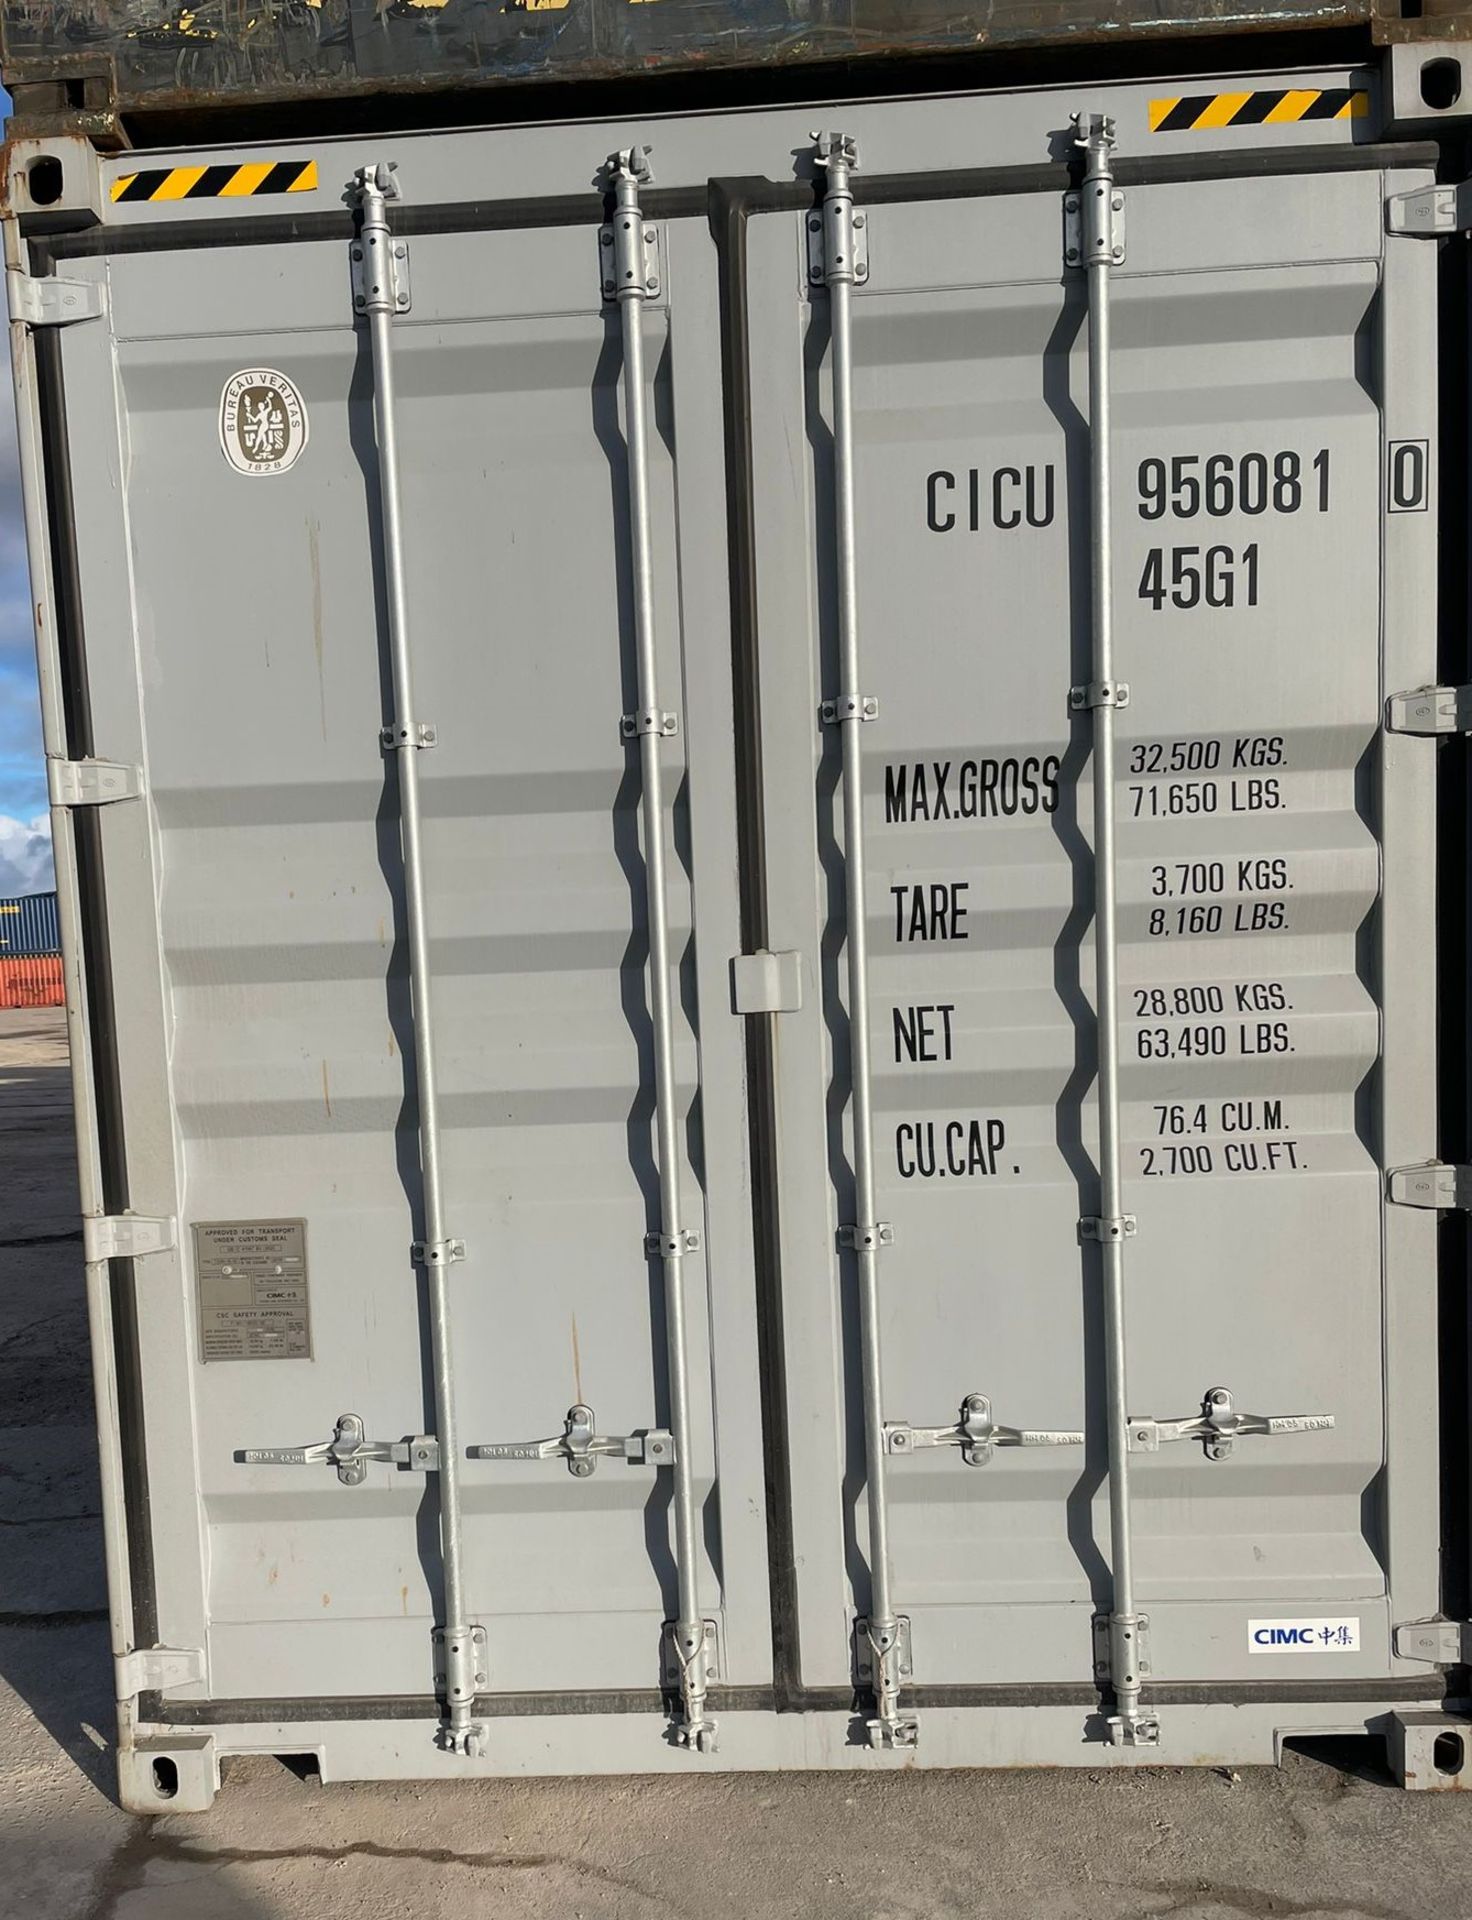 NO RESERVE - 40ft HC Shipping Container - ref CICU9560810